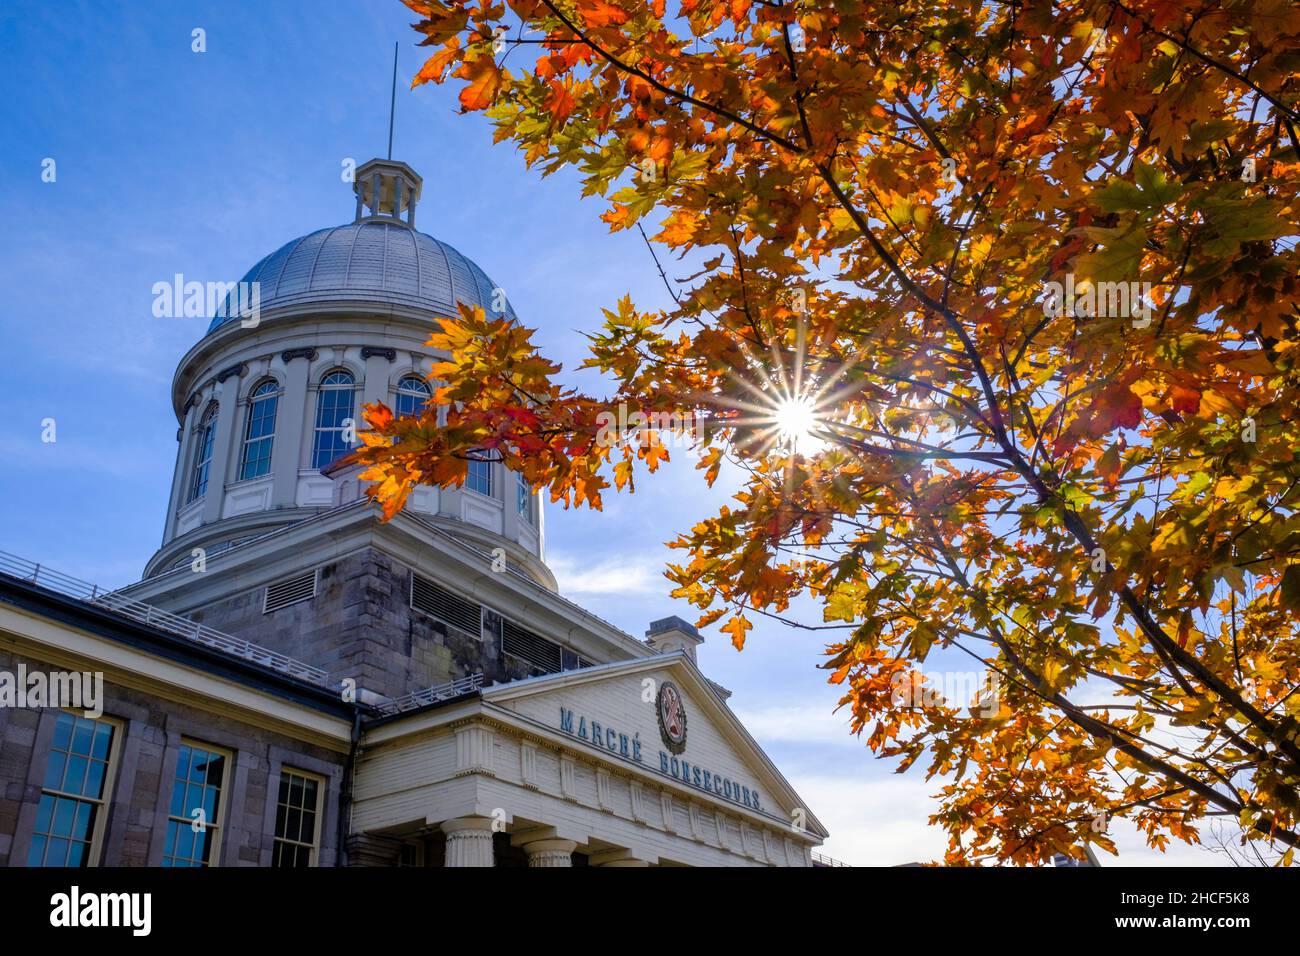 Kuppel und Fassade von Marché Bonsecours, Bonsecours Market, National Historic Site of Canada in the Fall, Vieux Montreal, Quebec, Kanada Stockfoto